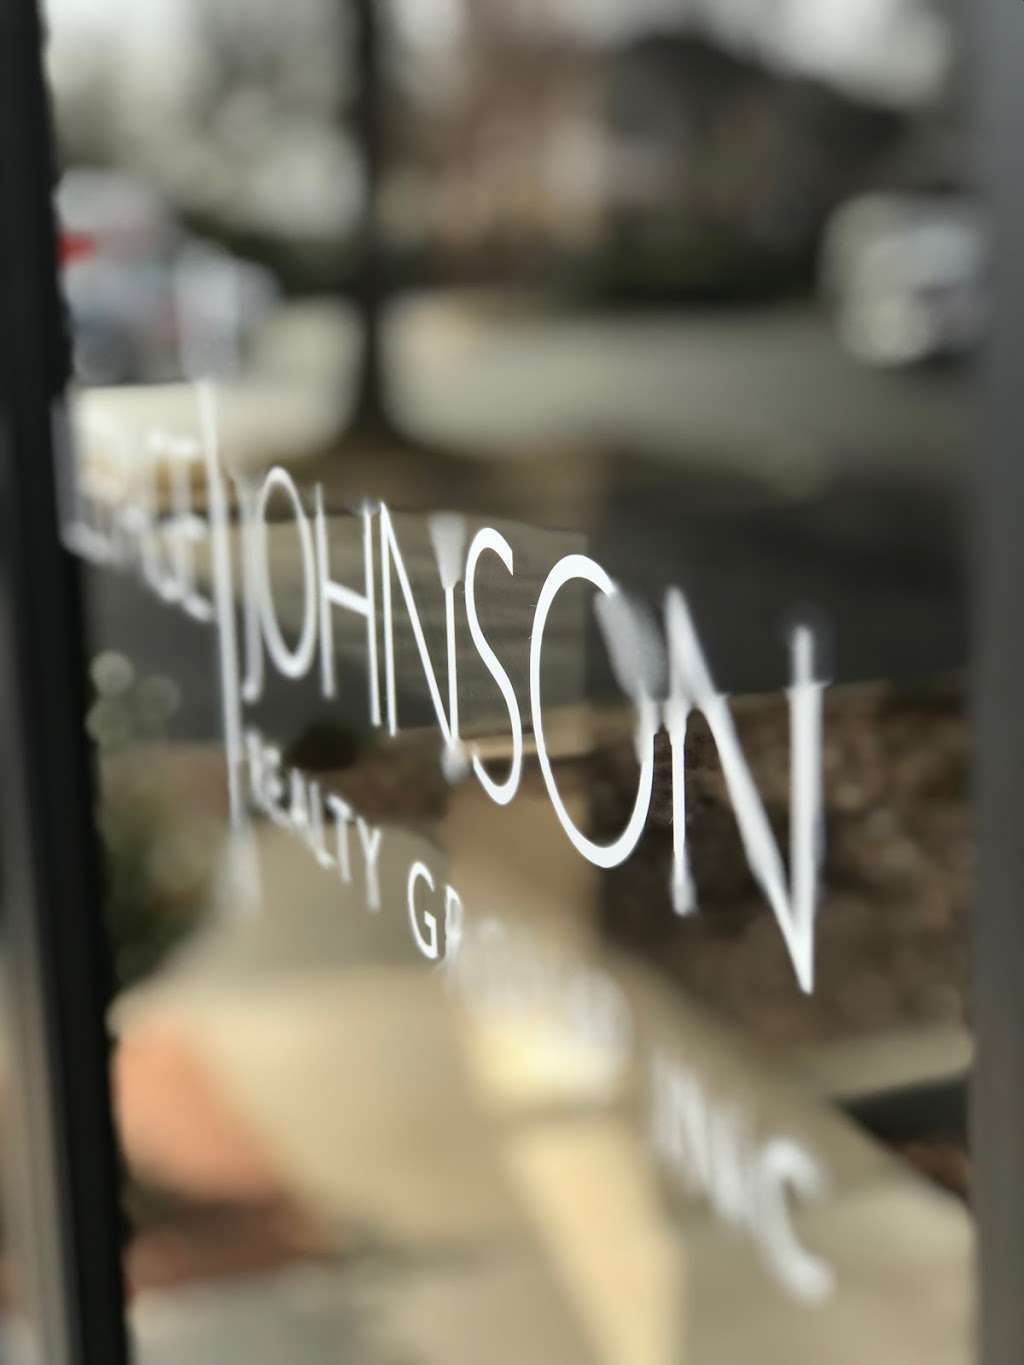 LePage Johnson Group at eXp Realty | 18067 W Catawba Ave Suite 102, Cornelius, NC 28031 | Phone: (704) 618-2412